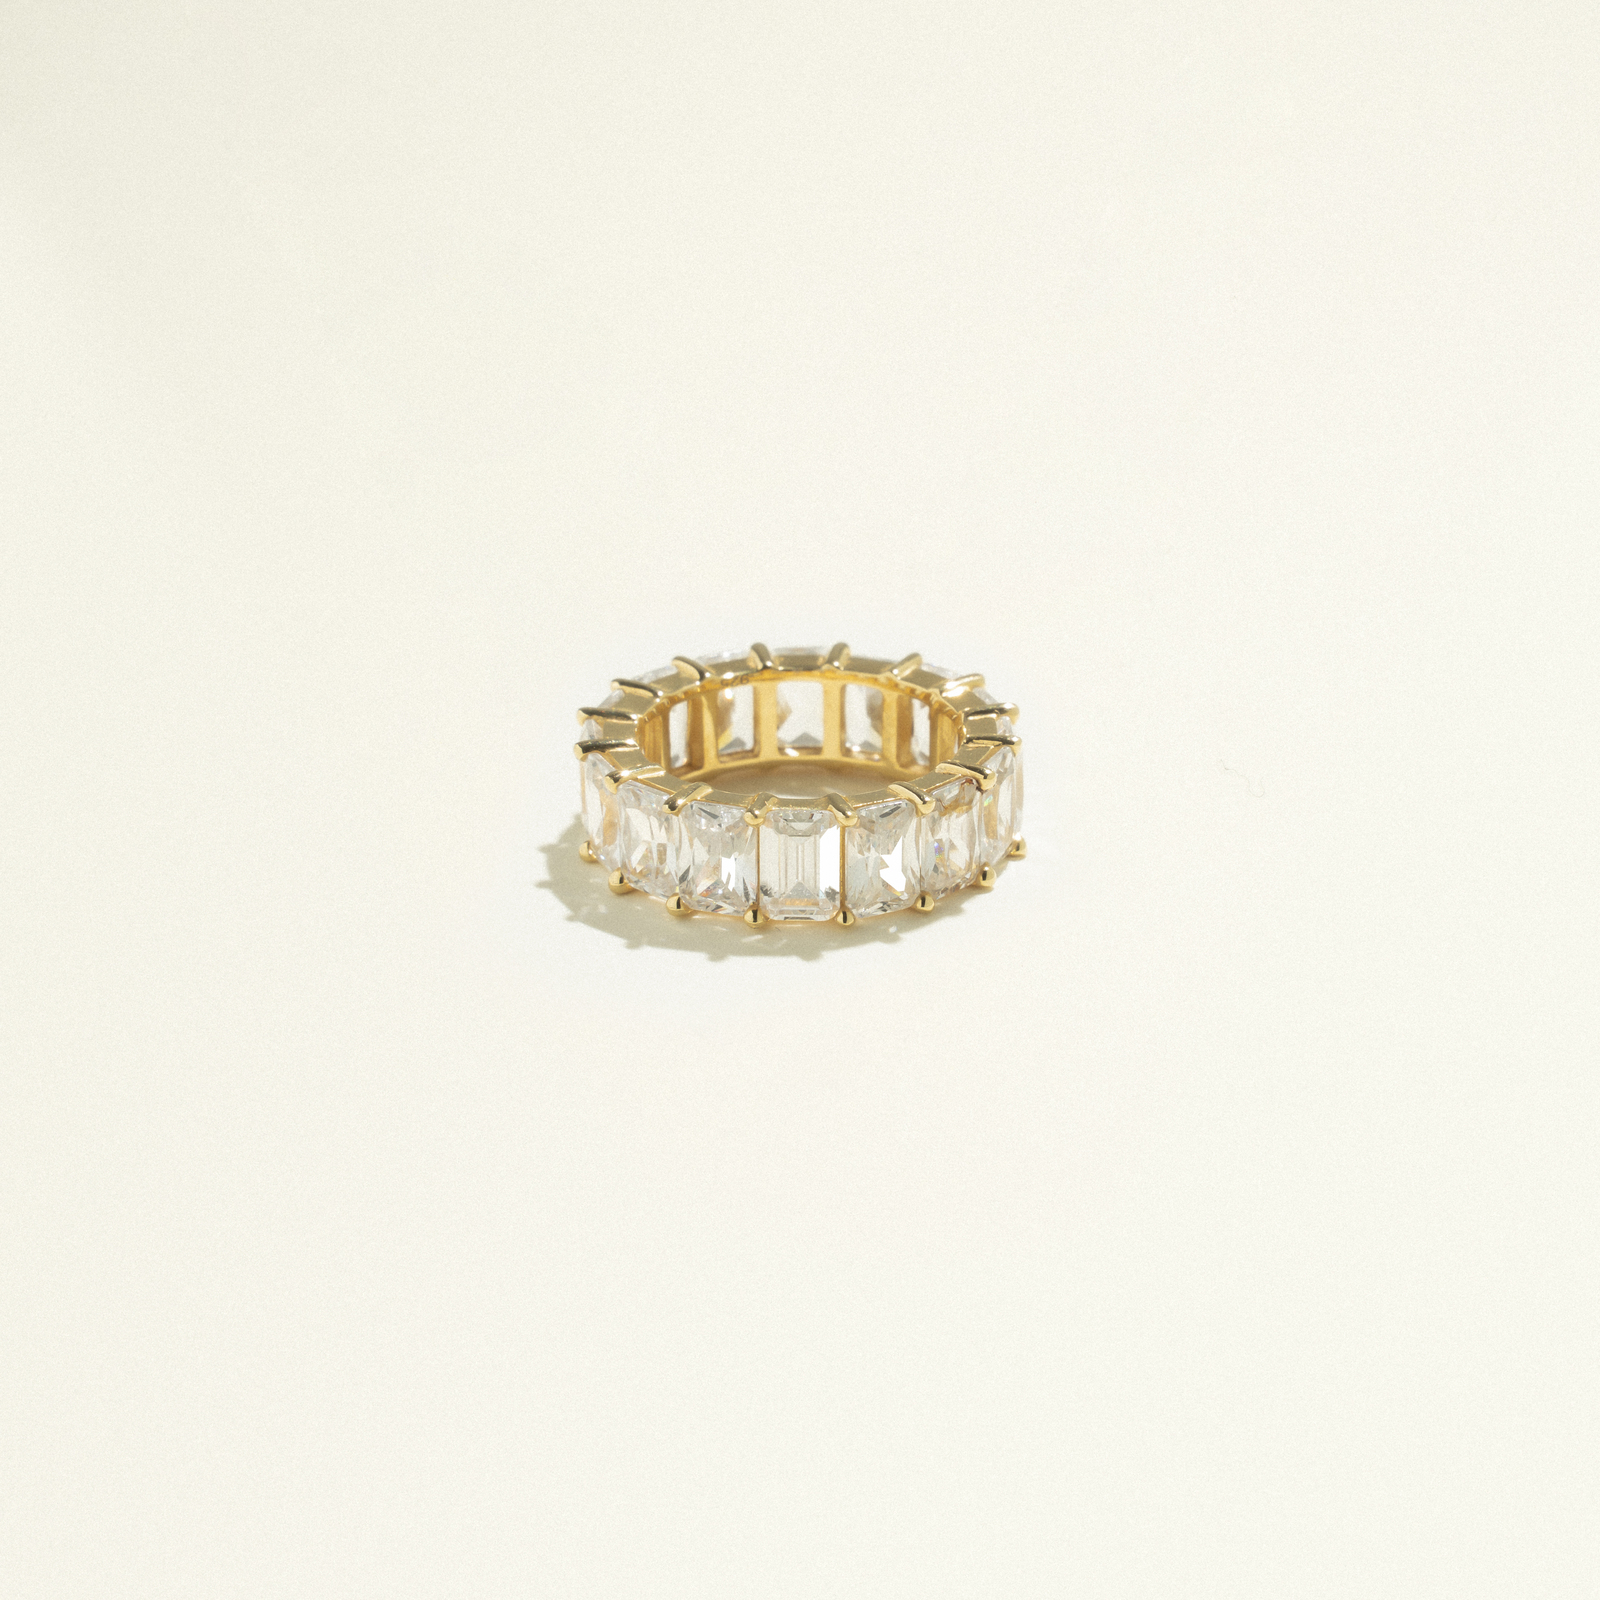 24Kt Gold Plated Baguette Ring with White Zirconias